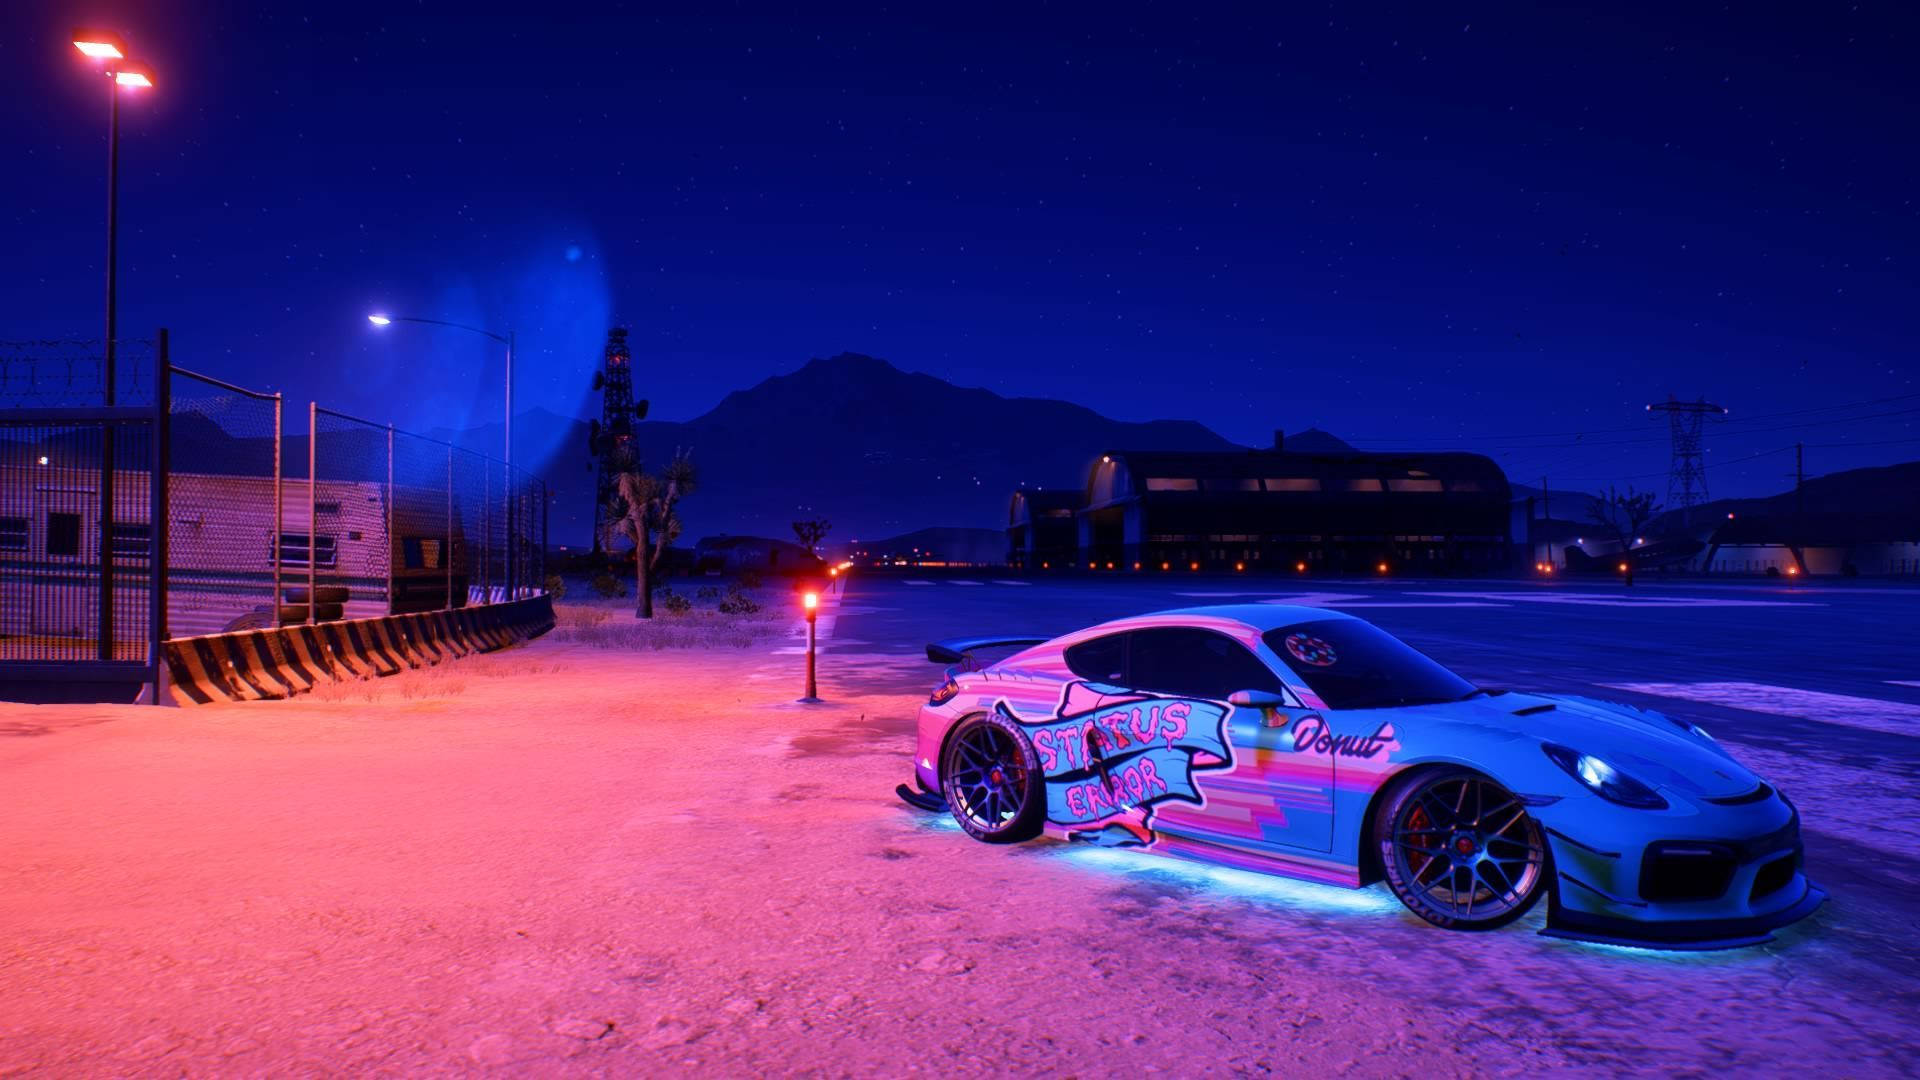 Pink Aesthetic Car On Snow For Computer